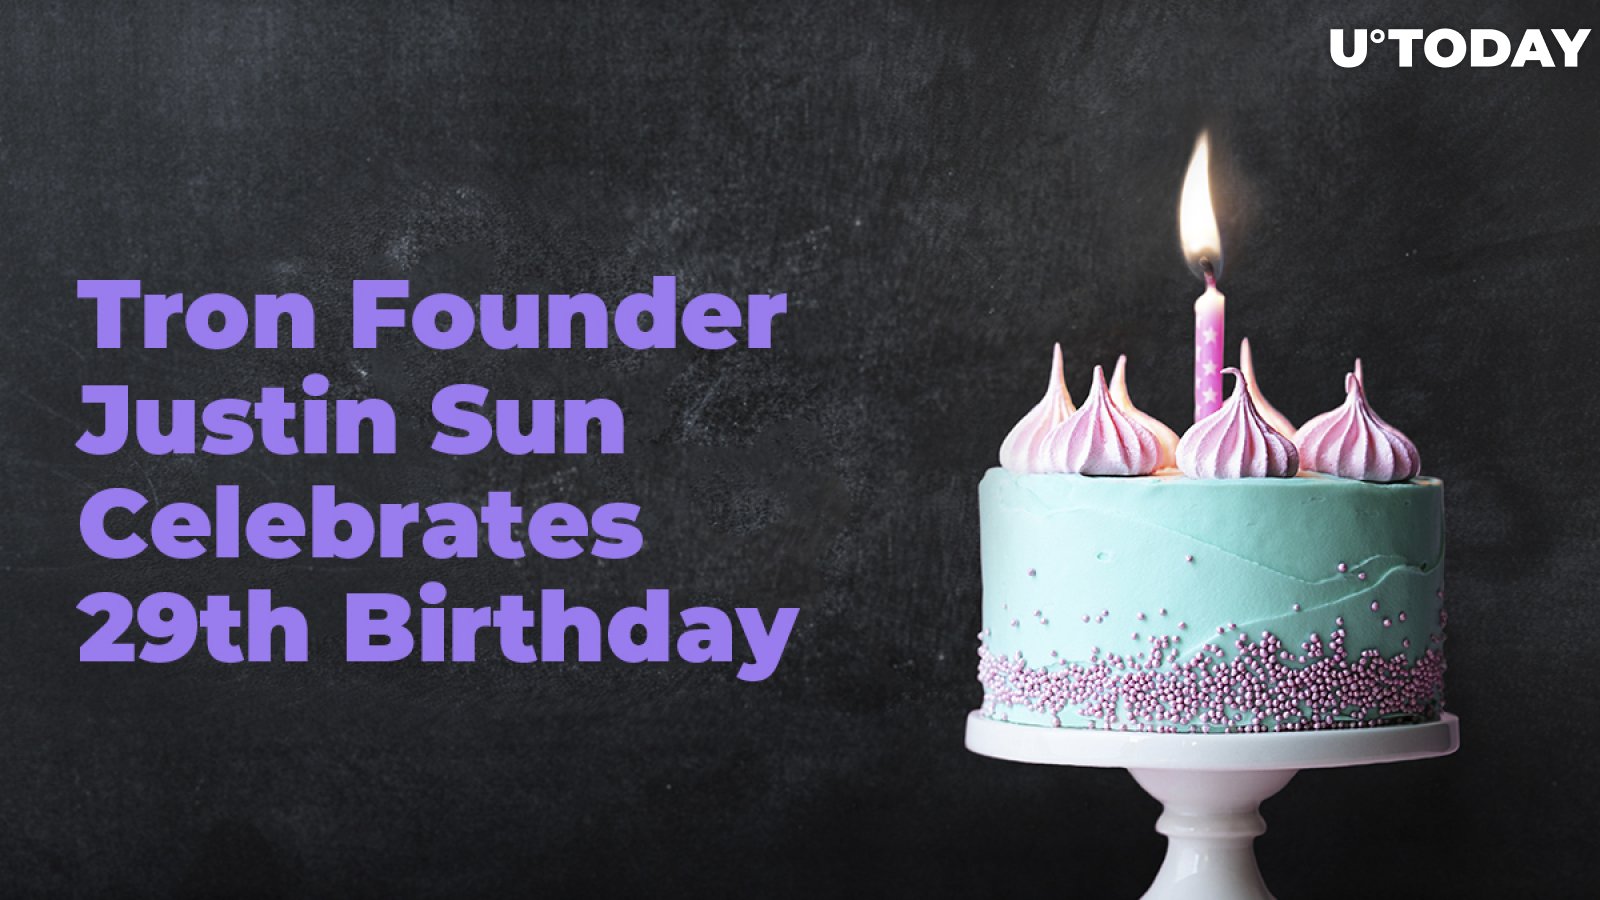 Tron Founder Justin Sun Celebrates 29th Birthday, Community Wishes for Lunch with Buffett in Tesla